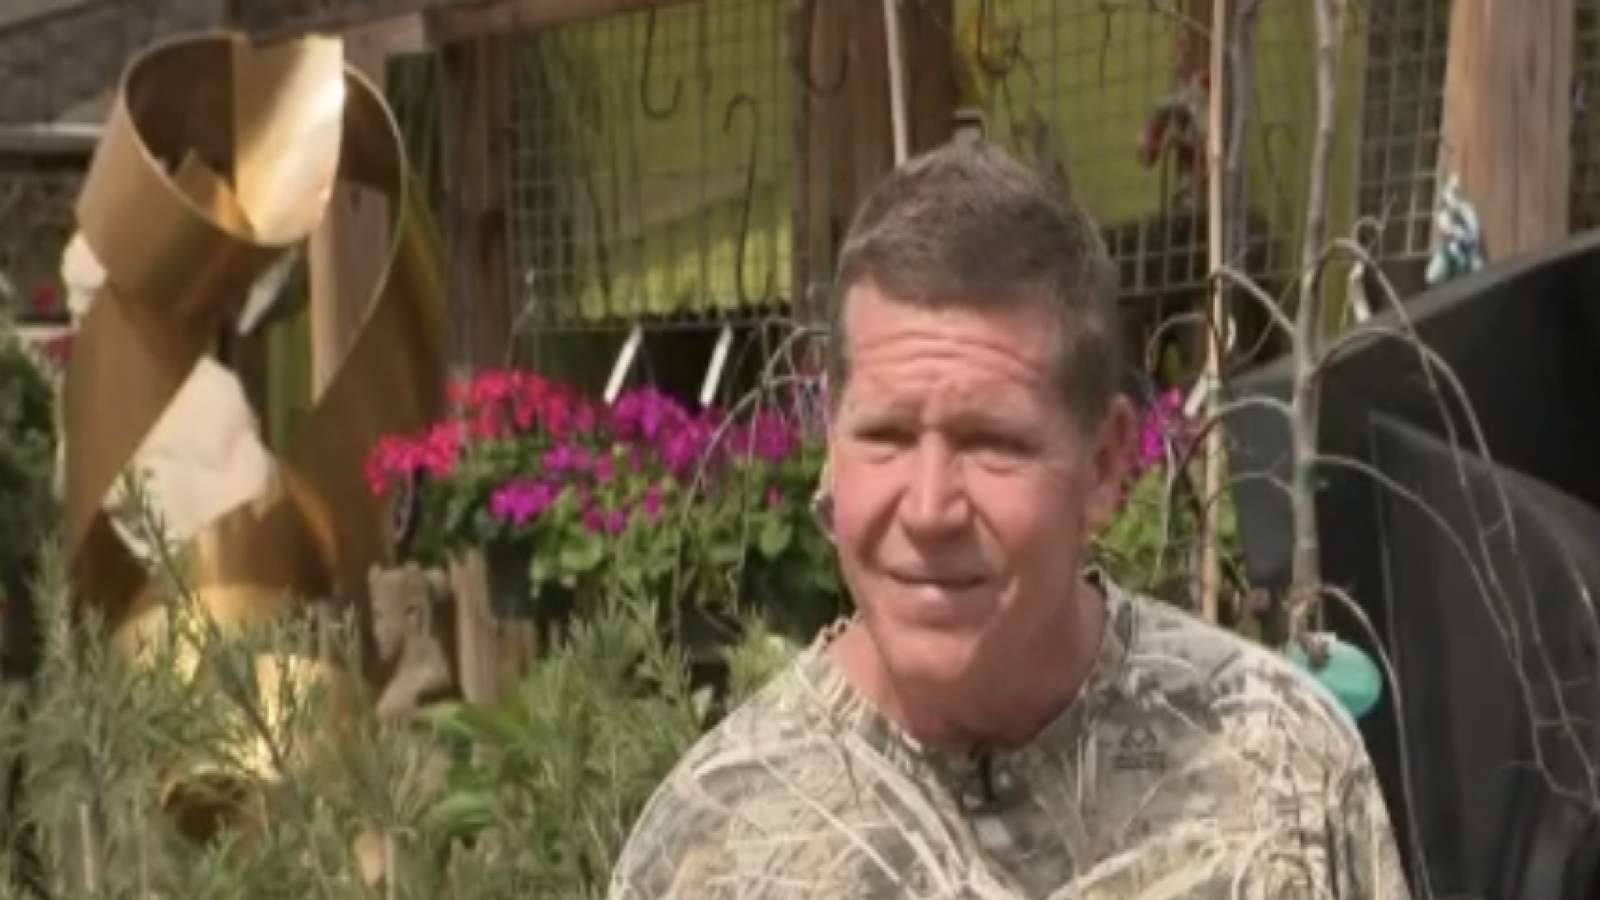 Master gardener gives advice on reviving your garden after the freeze